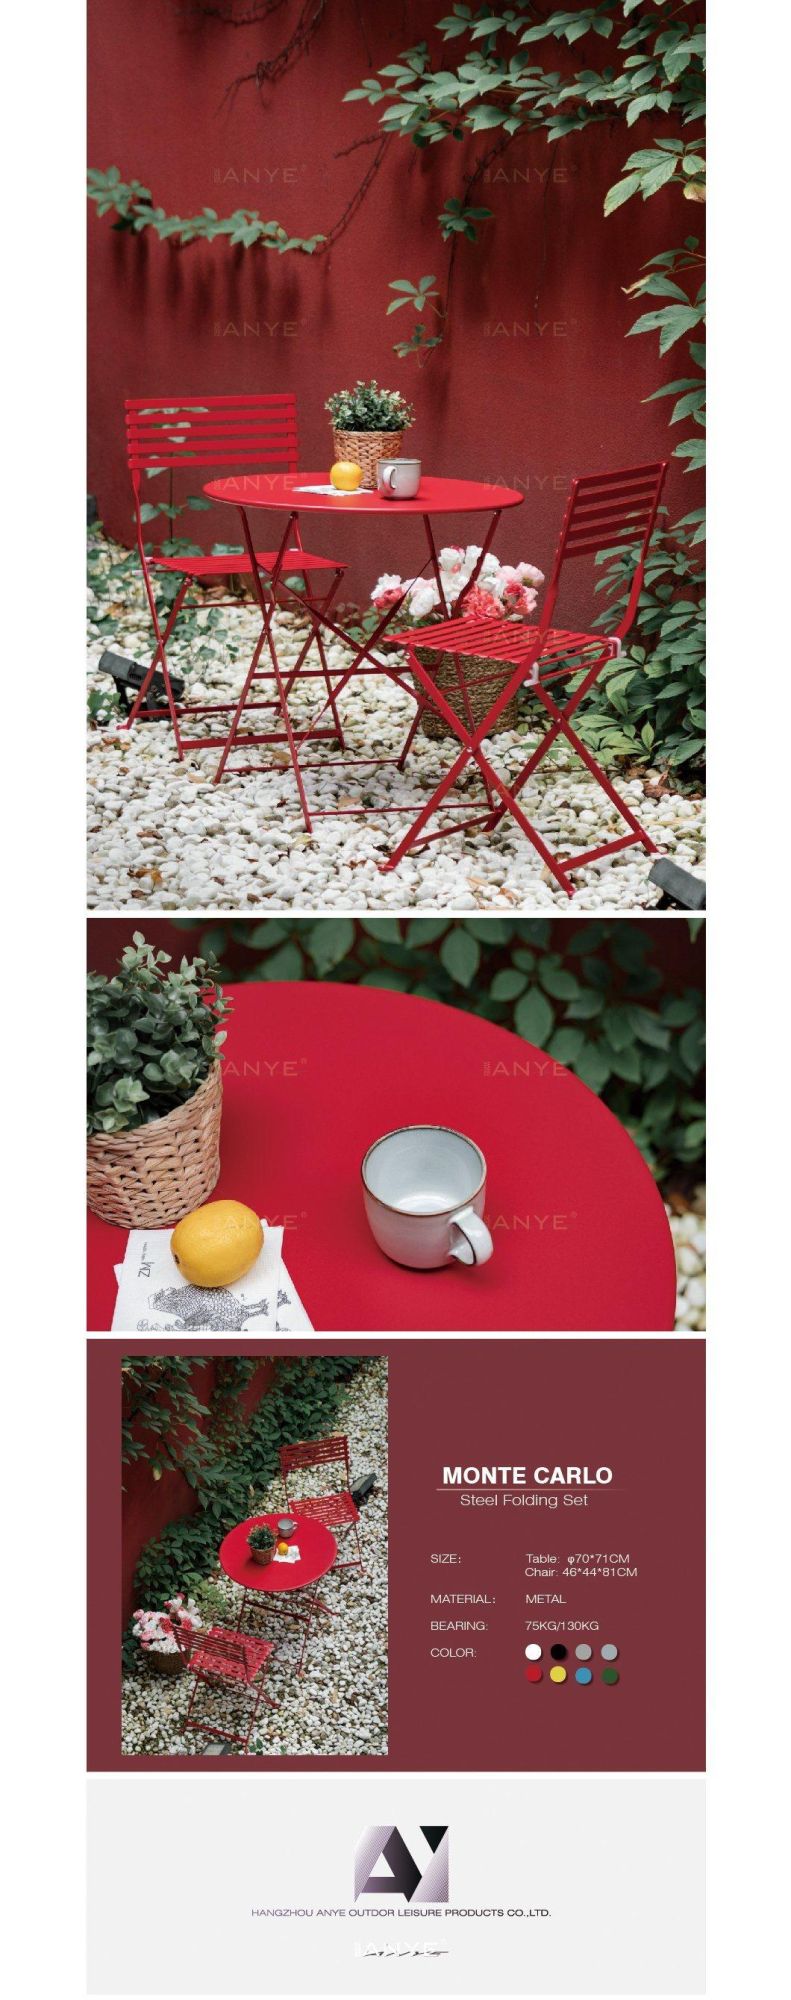 Western Country restaurant Furniture Portable Red Folding Table and Chair Dining Room Set